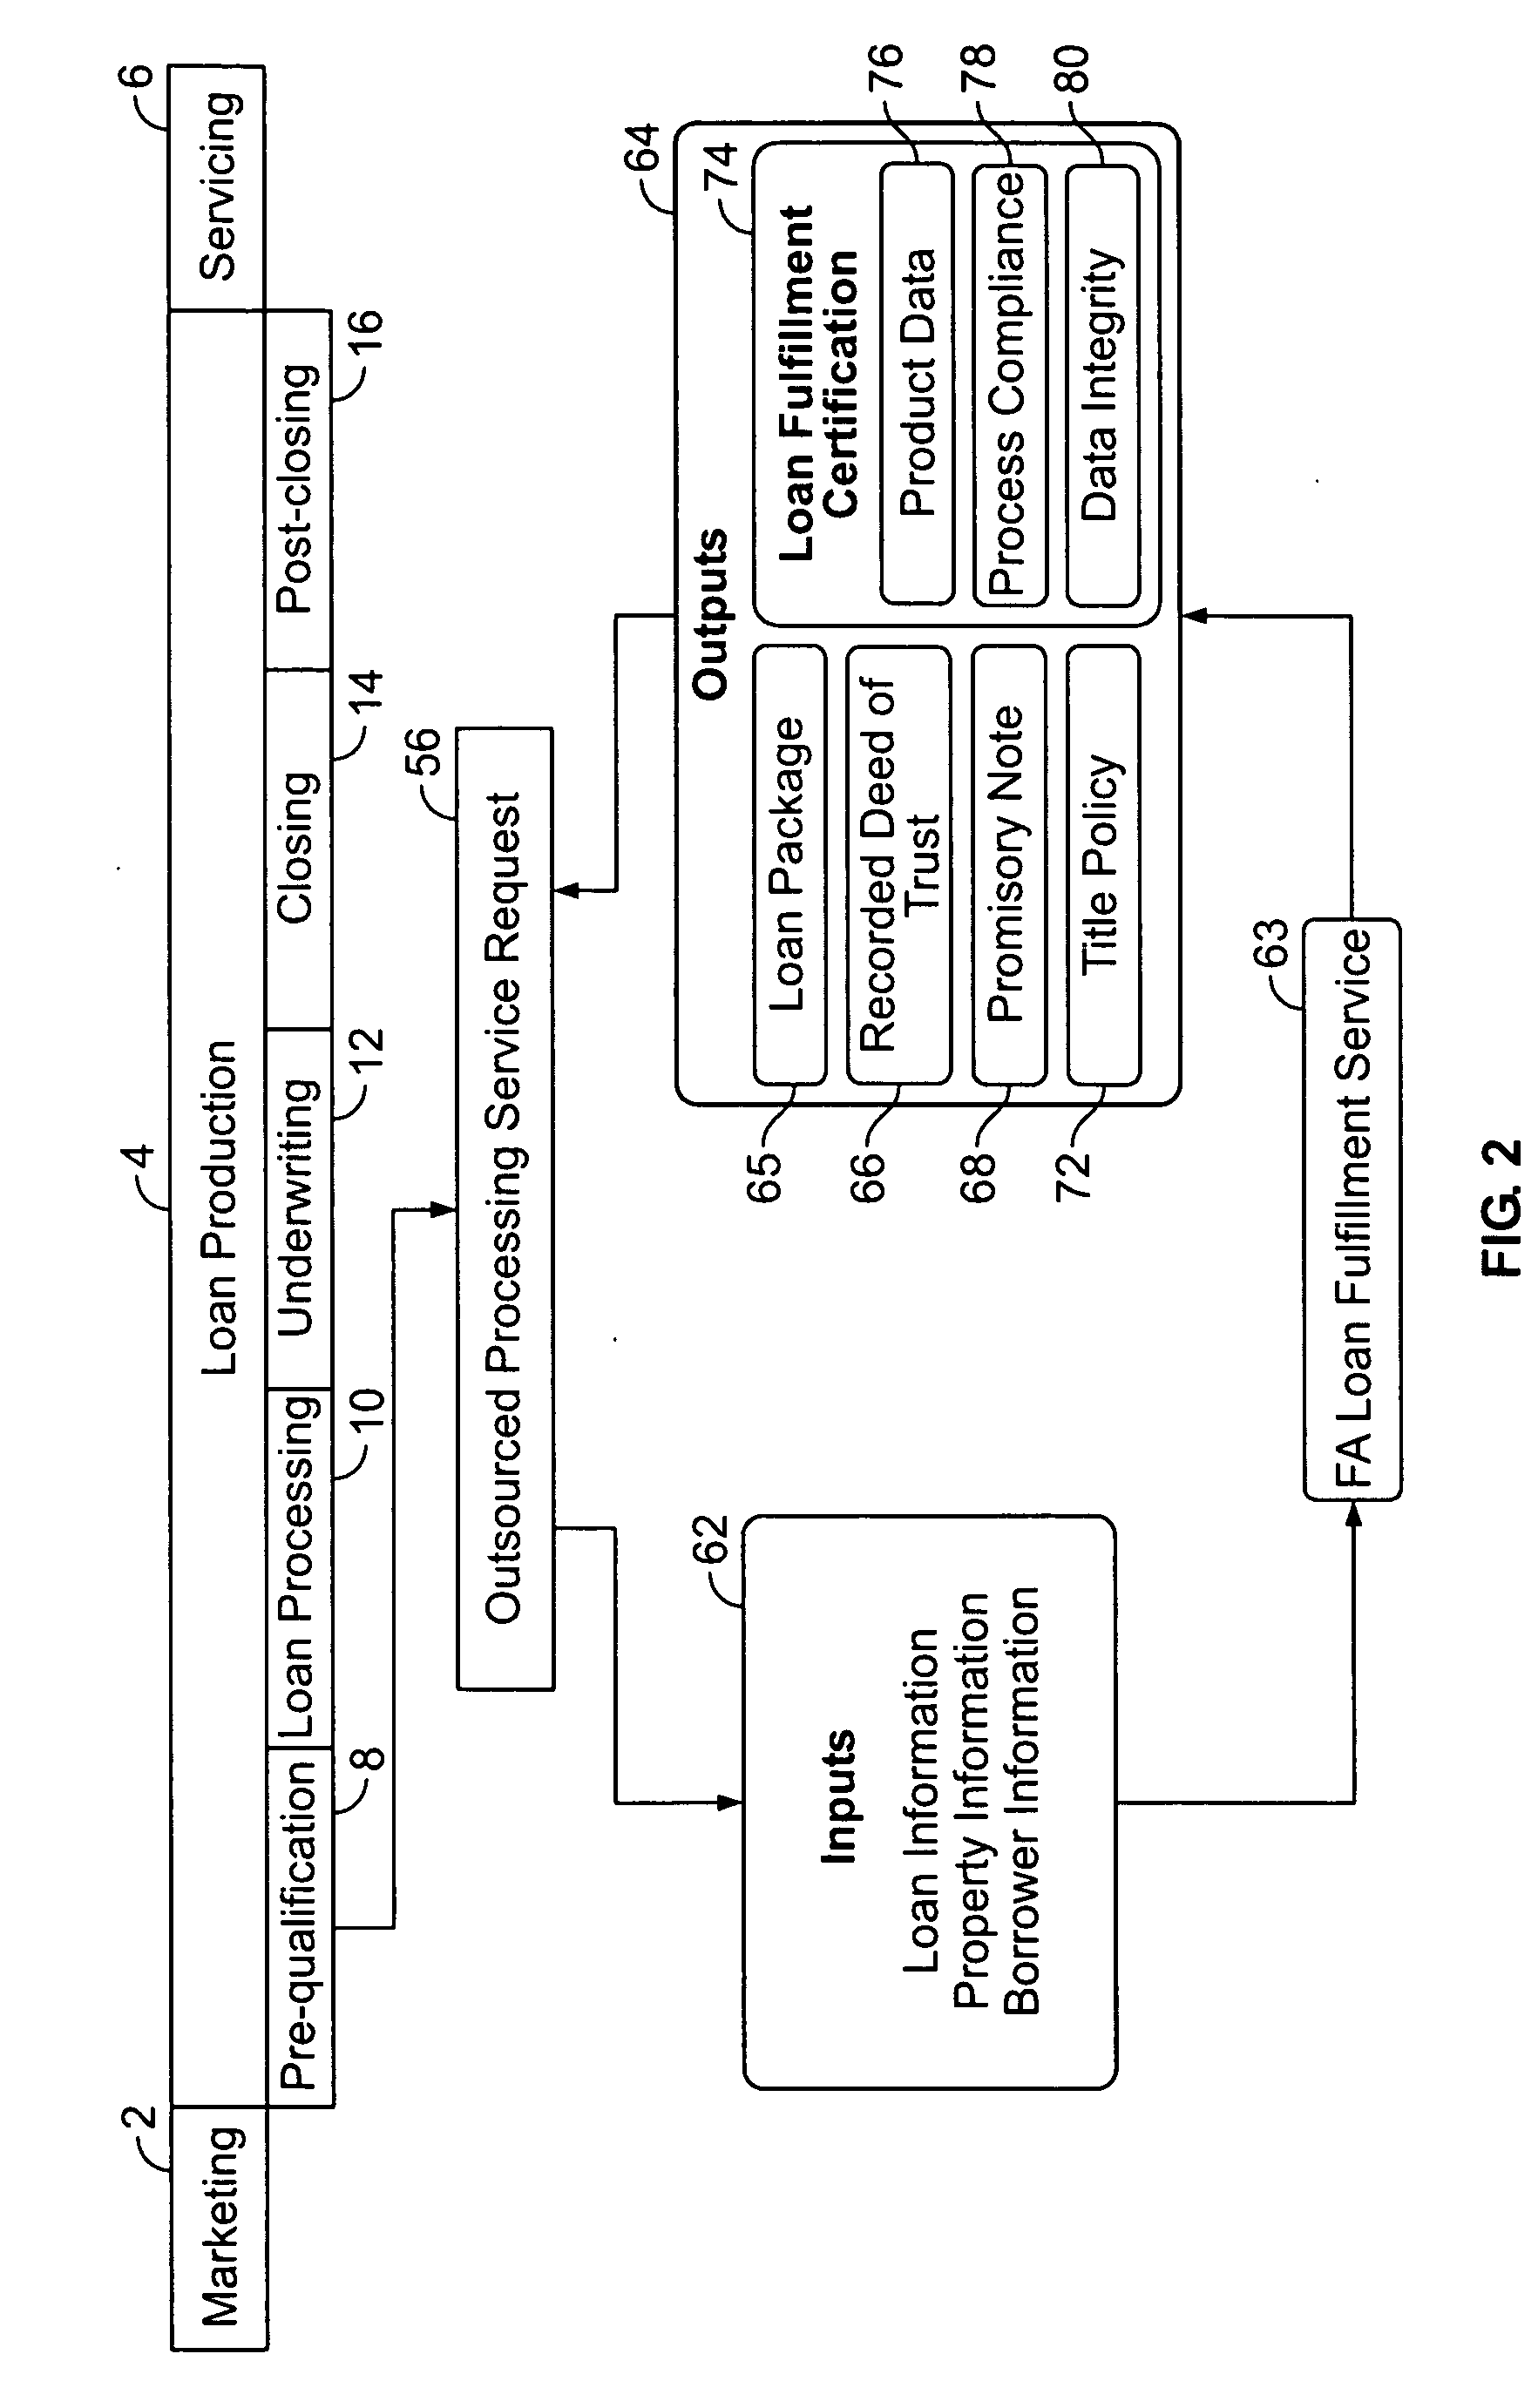 Product, system and method for certification of closing and mortgage loan fulfillment